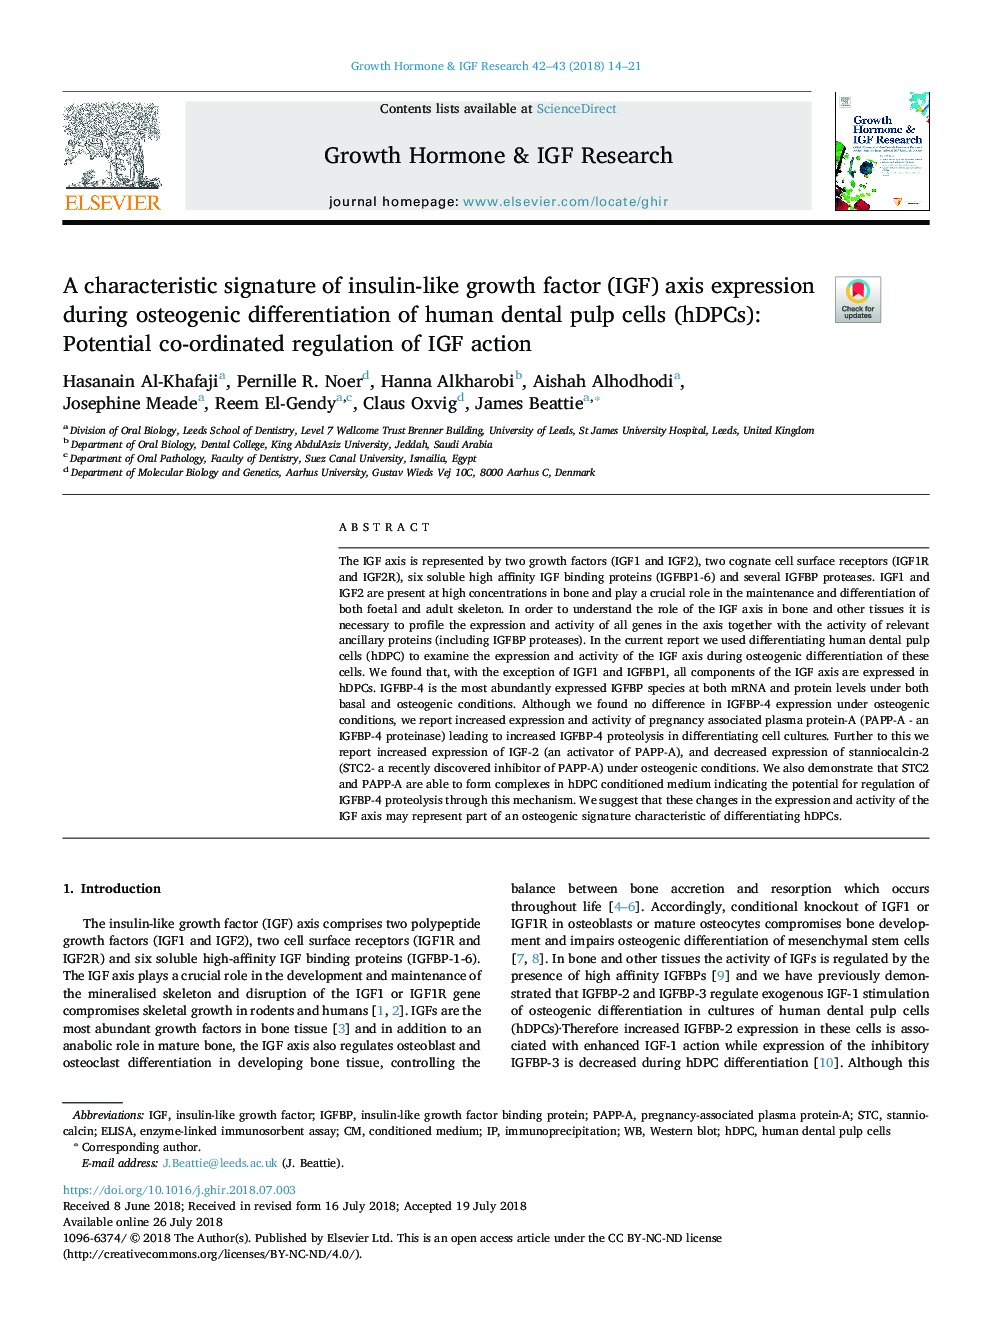 A characteristic signature of insulin-like growth factor (IGF) axis expression during osteogenic differentiation of human dental pulp cells (hDPCs): Potential co-ordinated regulation of IGF action